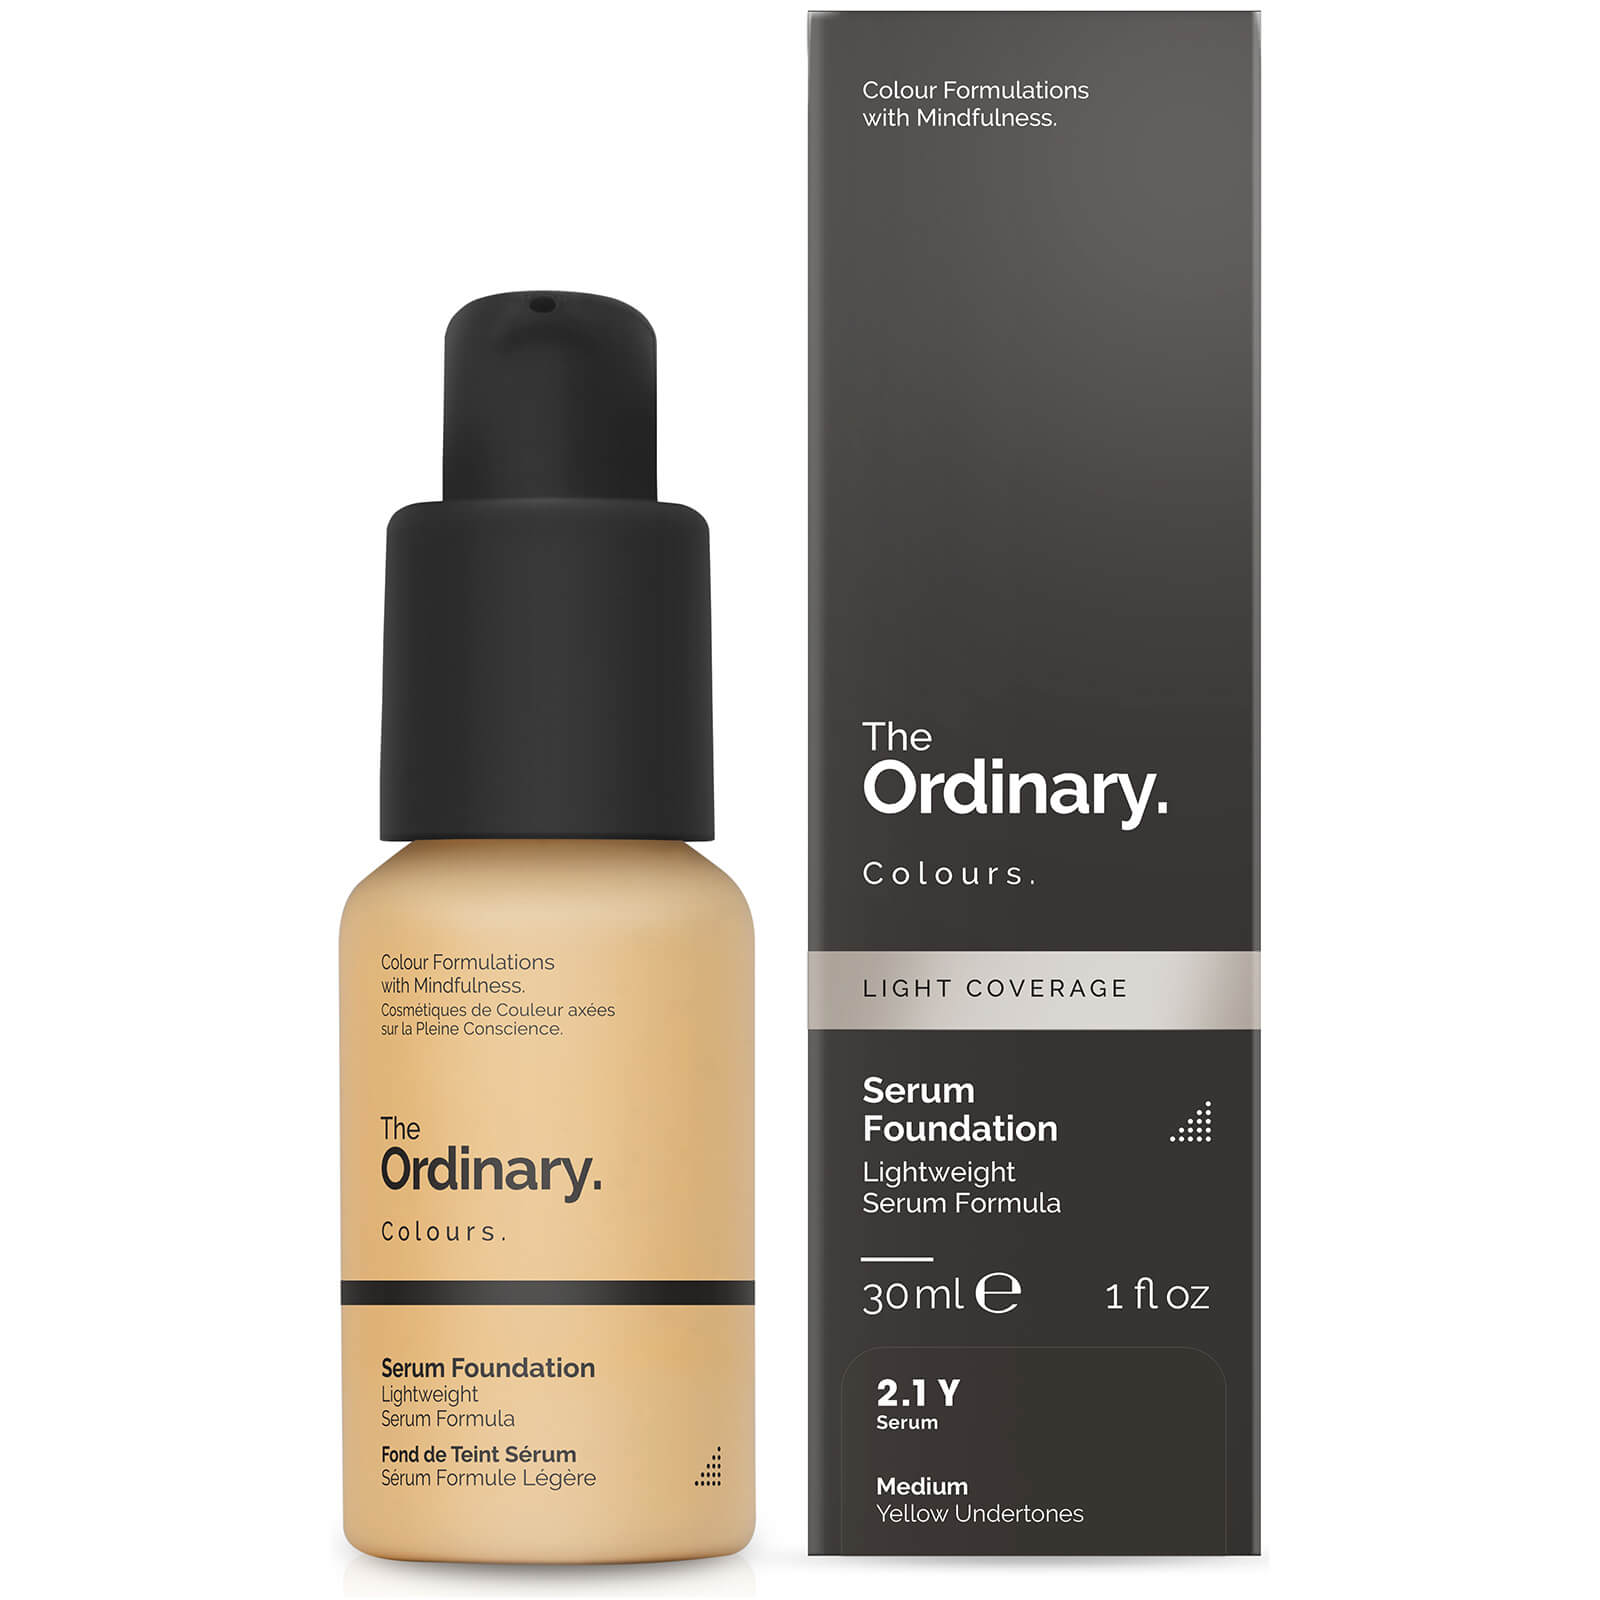 The Ordinary Serum Foundation with SPF 15 by The Ordinary Colours 30ml (Ulike fargetoner) - 2.1Y